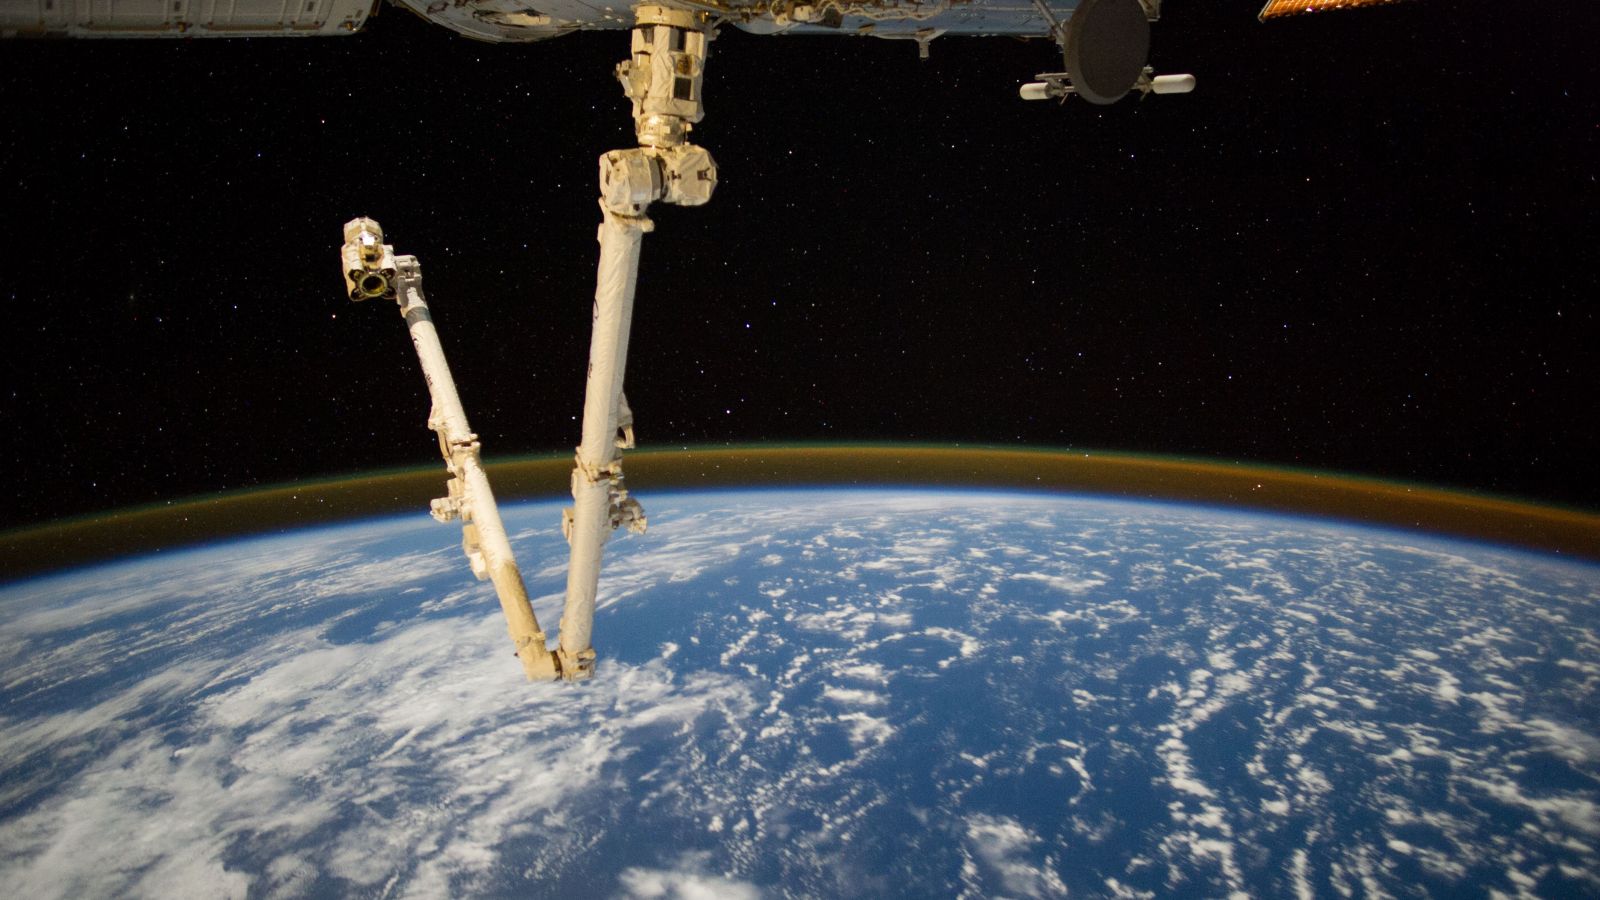 The Canadarm2 Attached To The International Space Station - Outer Space - HD Wallpaper 